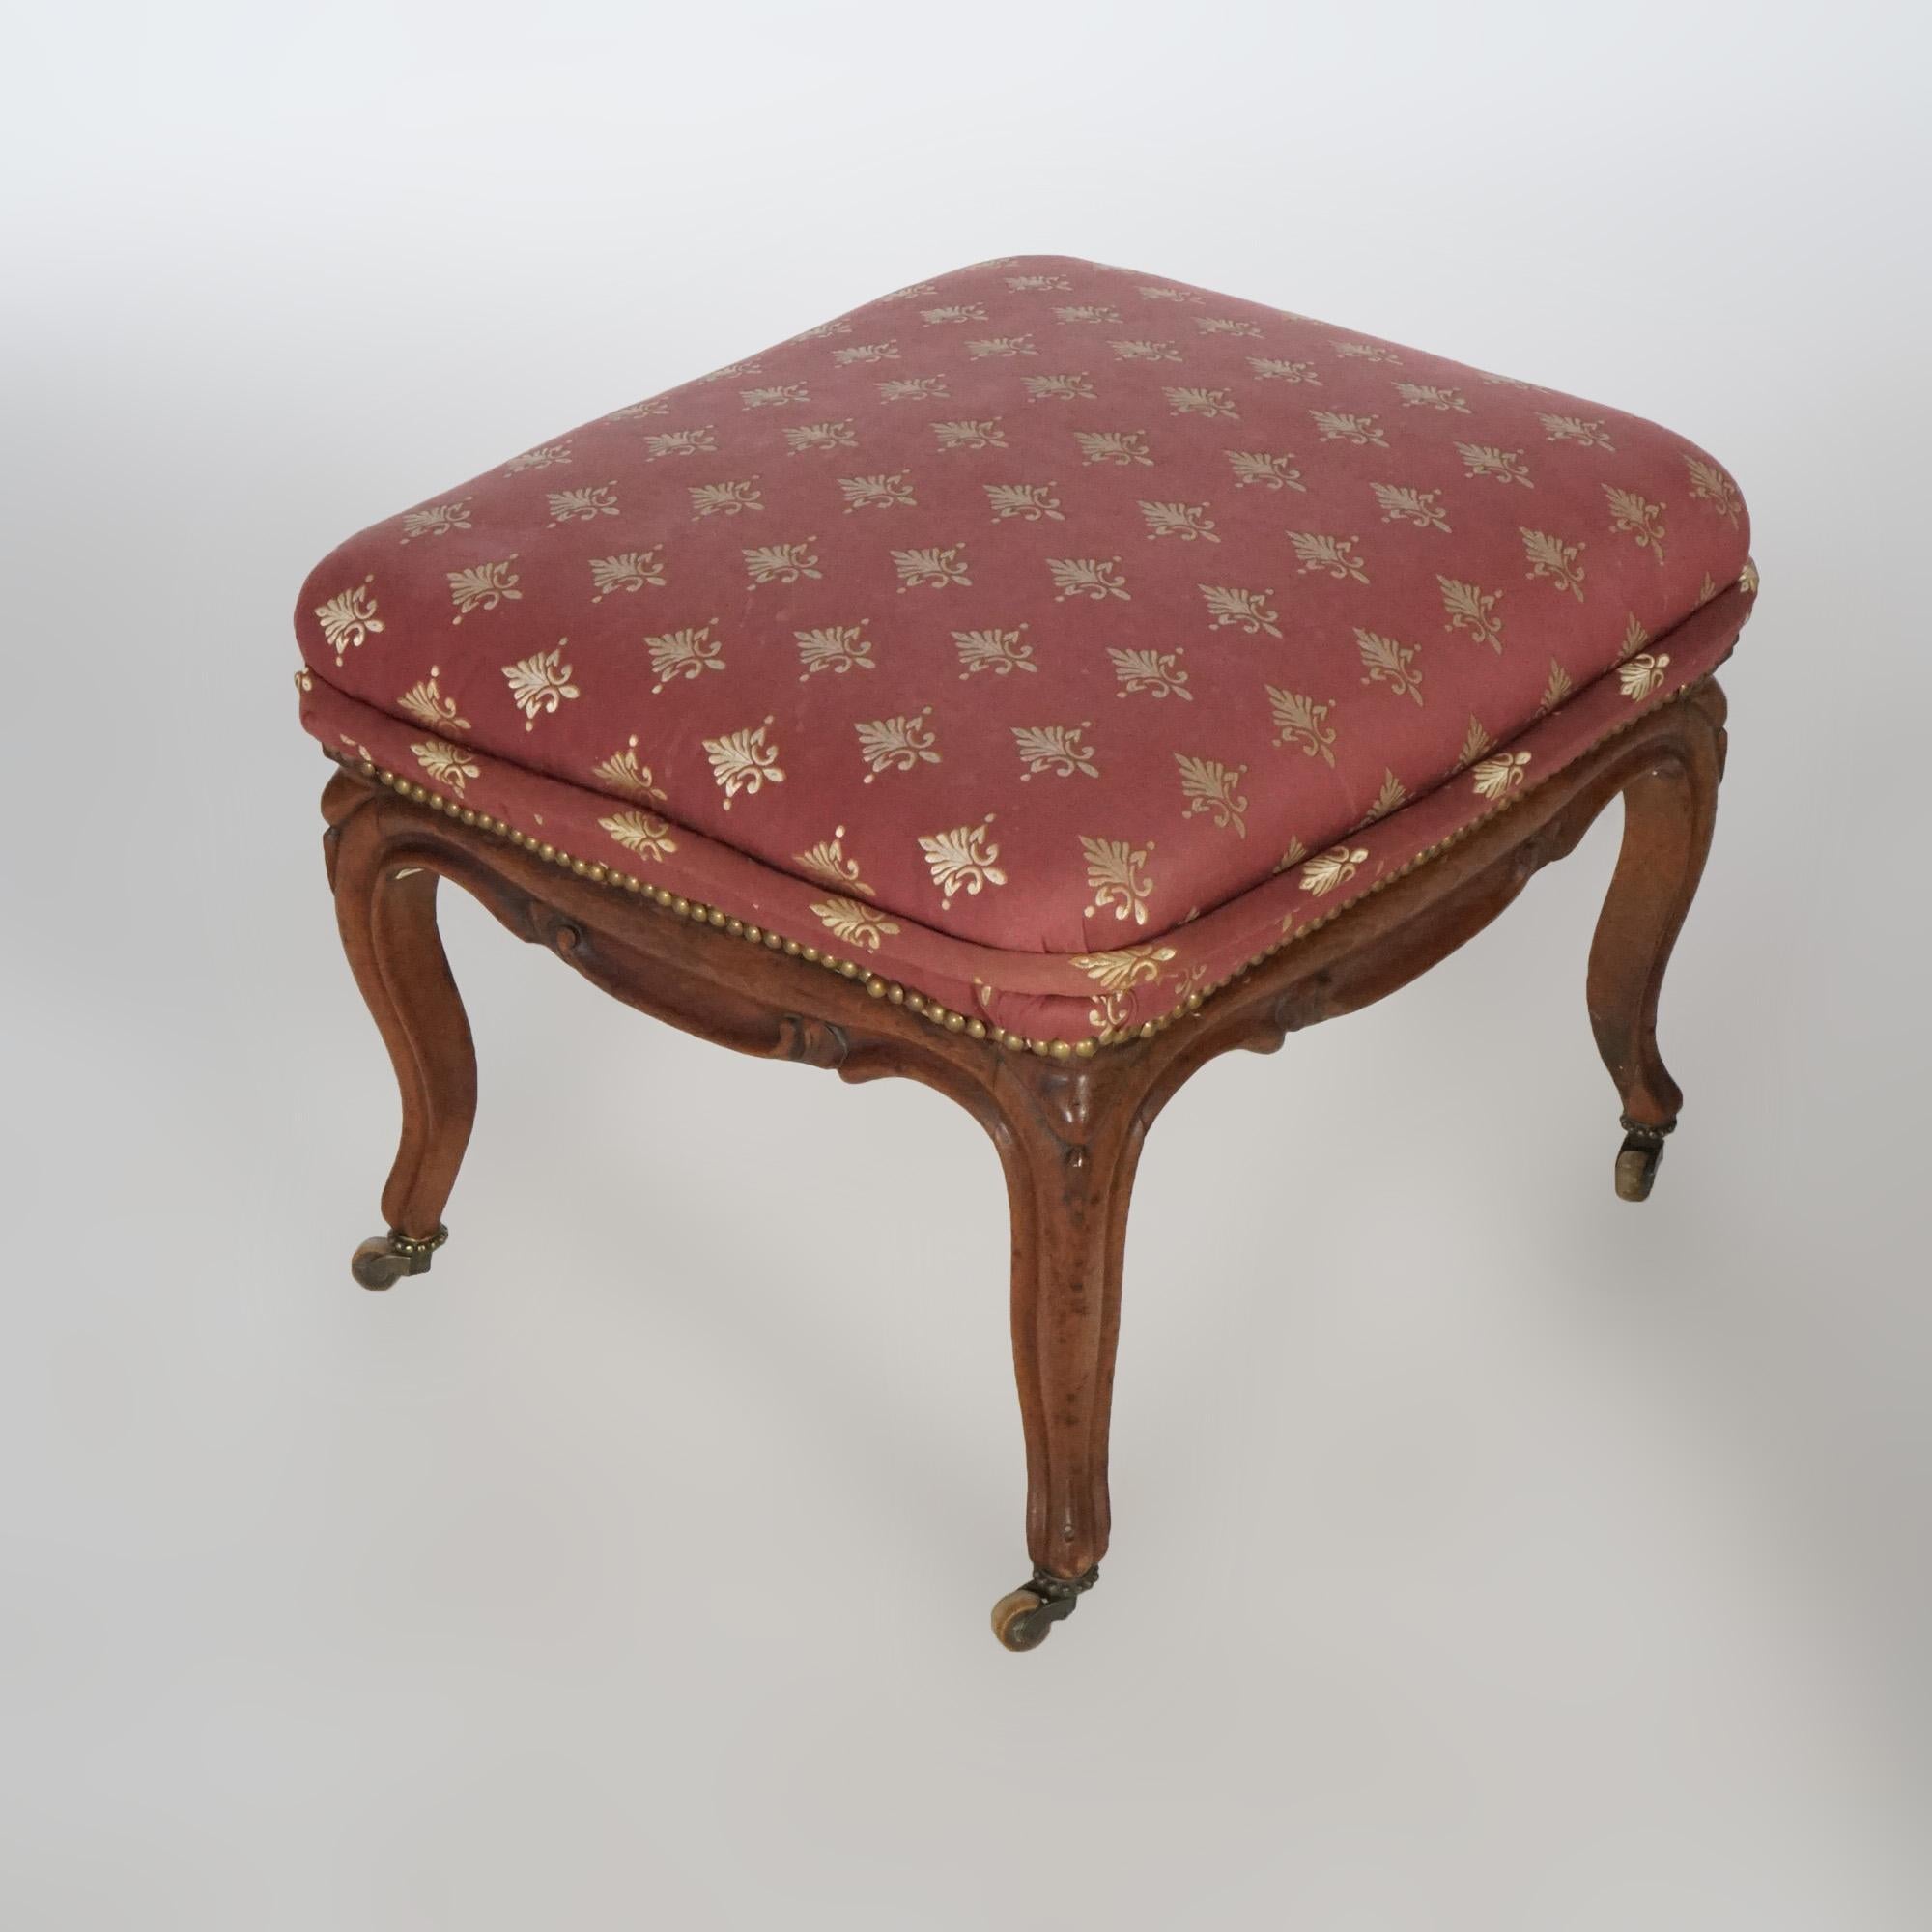 Antique French Style Carved Walnut & Upholstered Foot Stool, circa 1920 For Sale 1